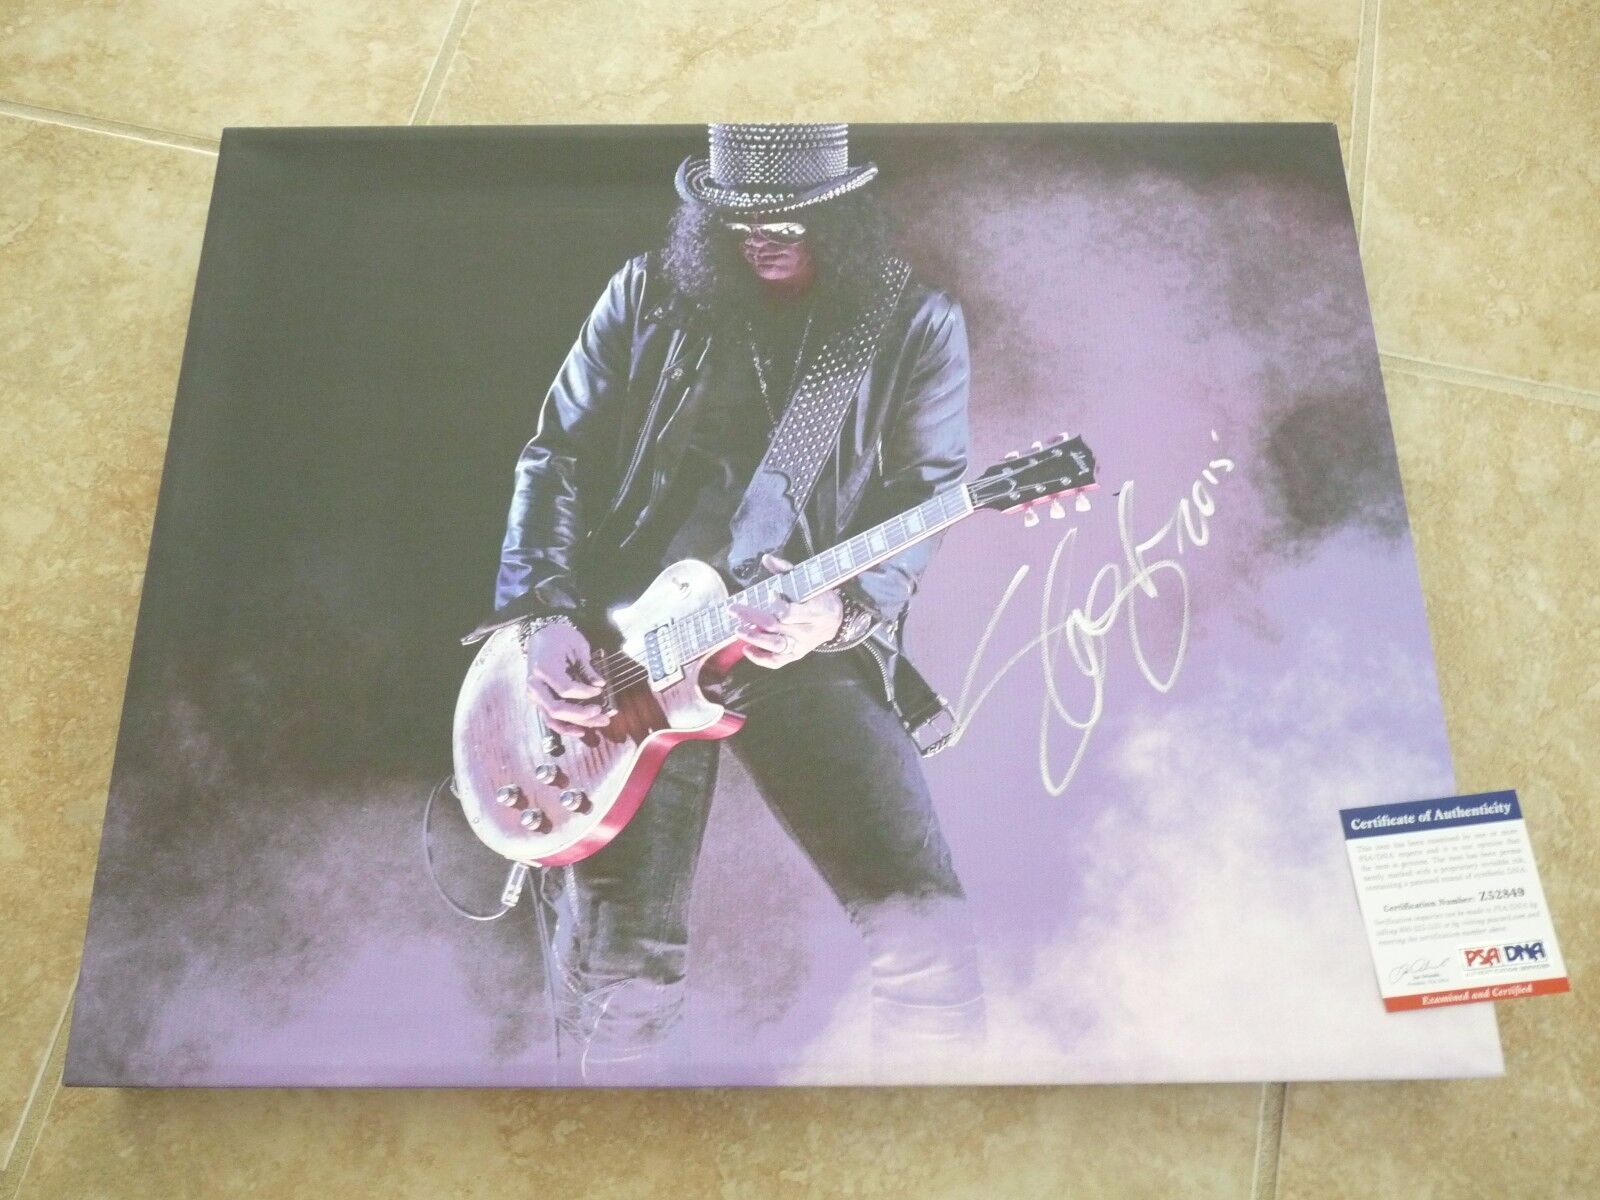 Slash Guns & Roses HUGE Signed Autoographed 16x20 CANVAS Photo Poster painting PSA Certified